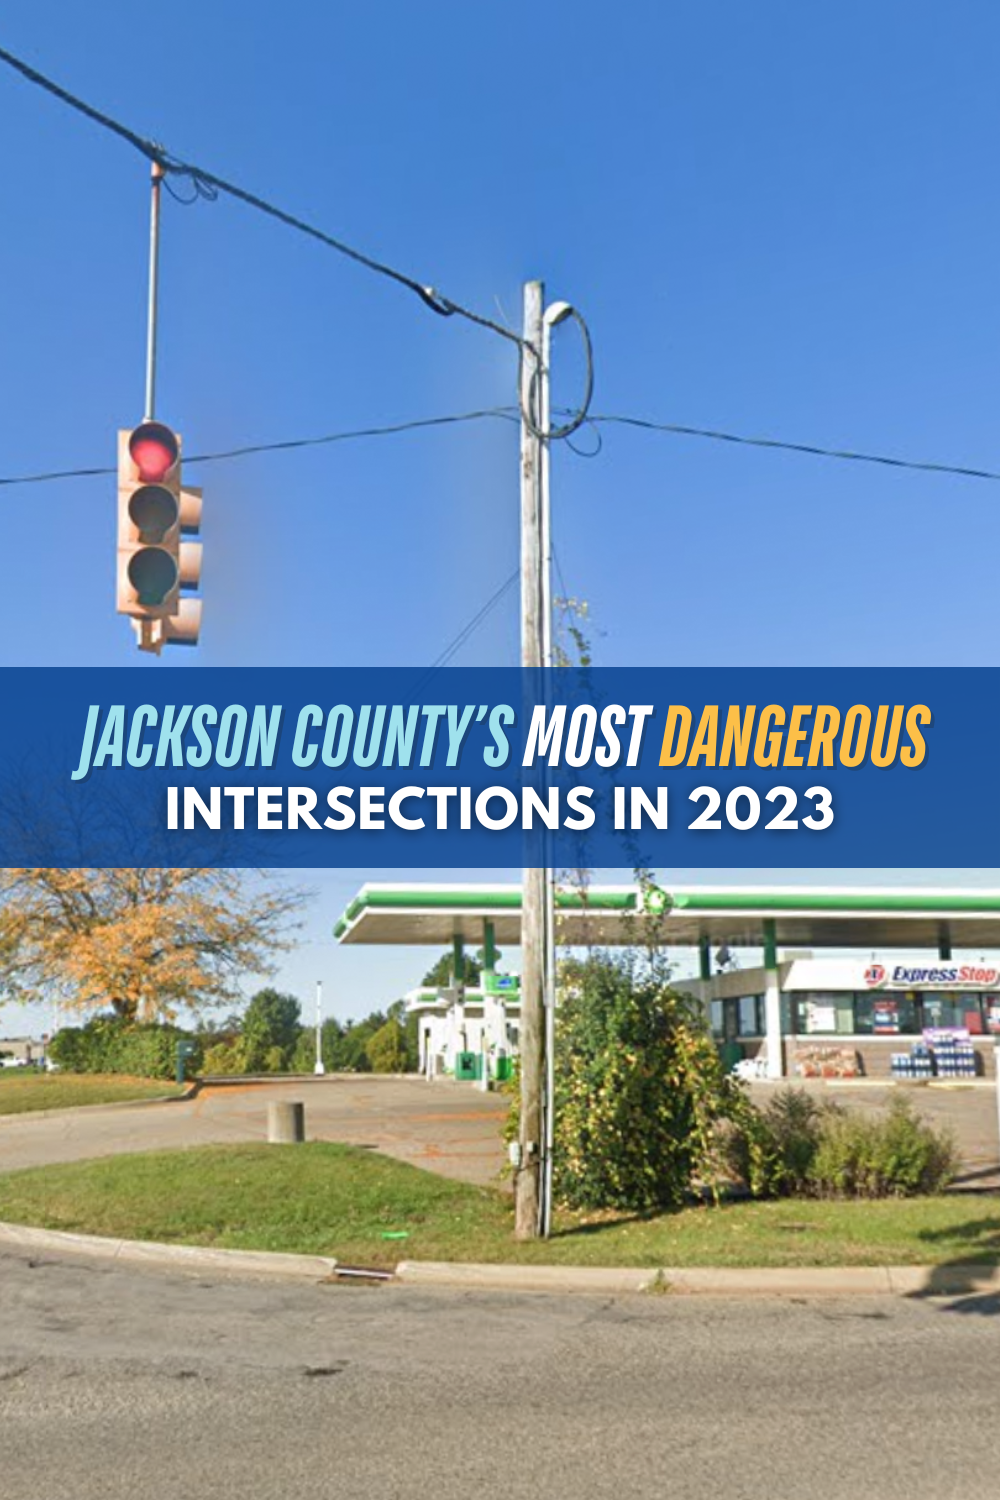 Jackson County’s Most Dangerous Intersections in 2023